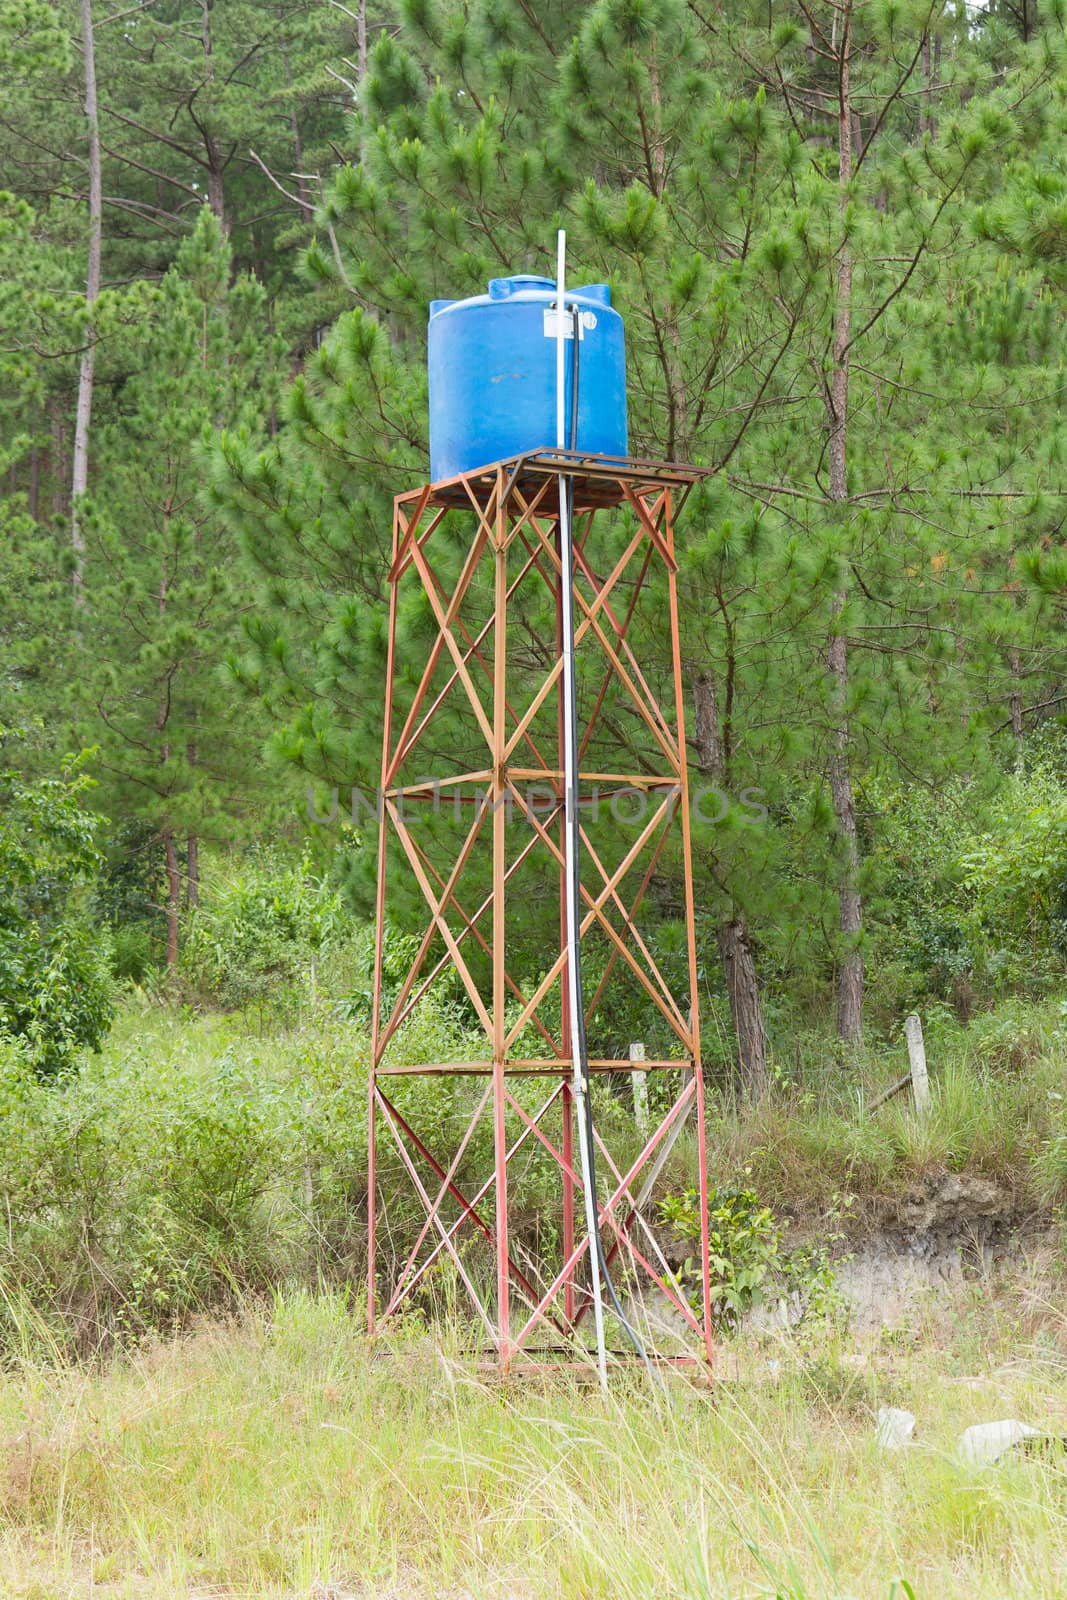 Primitive blue water tower in central Vietnam